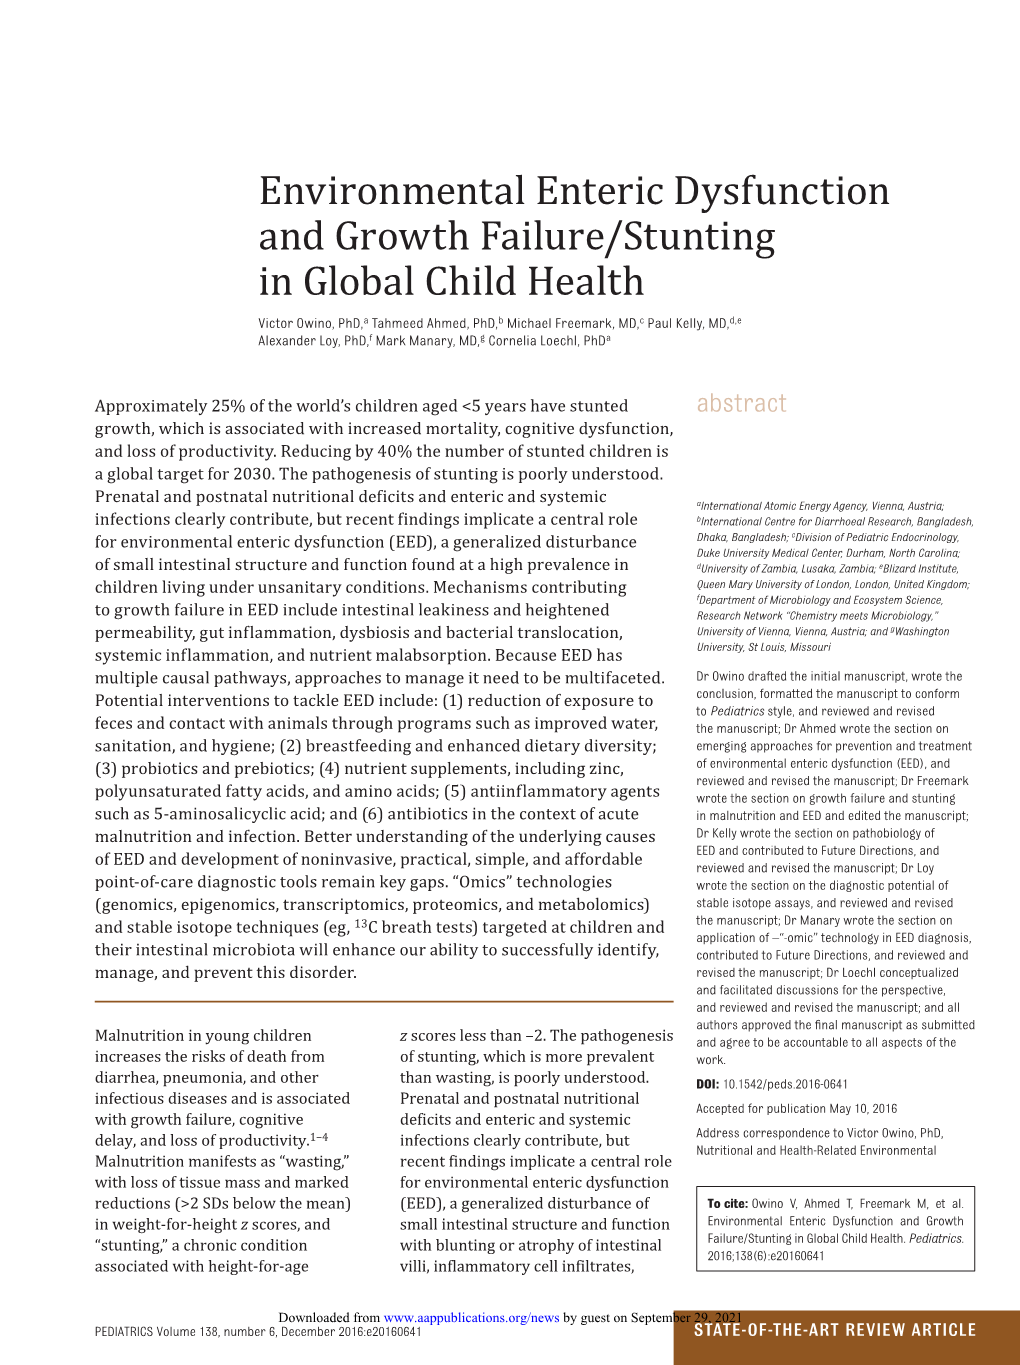 Environmental Enteric Dysfunction and Growth Failure/Stunting In